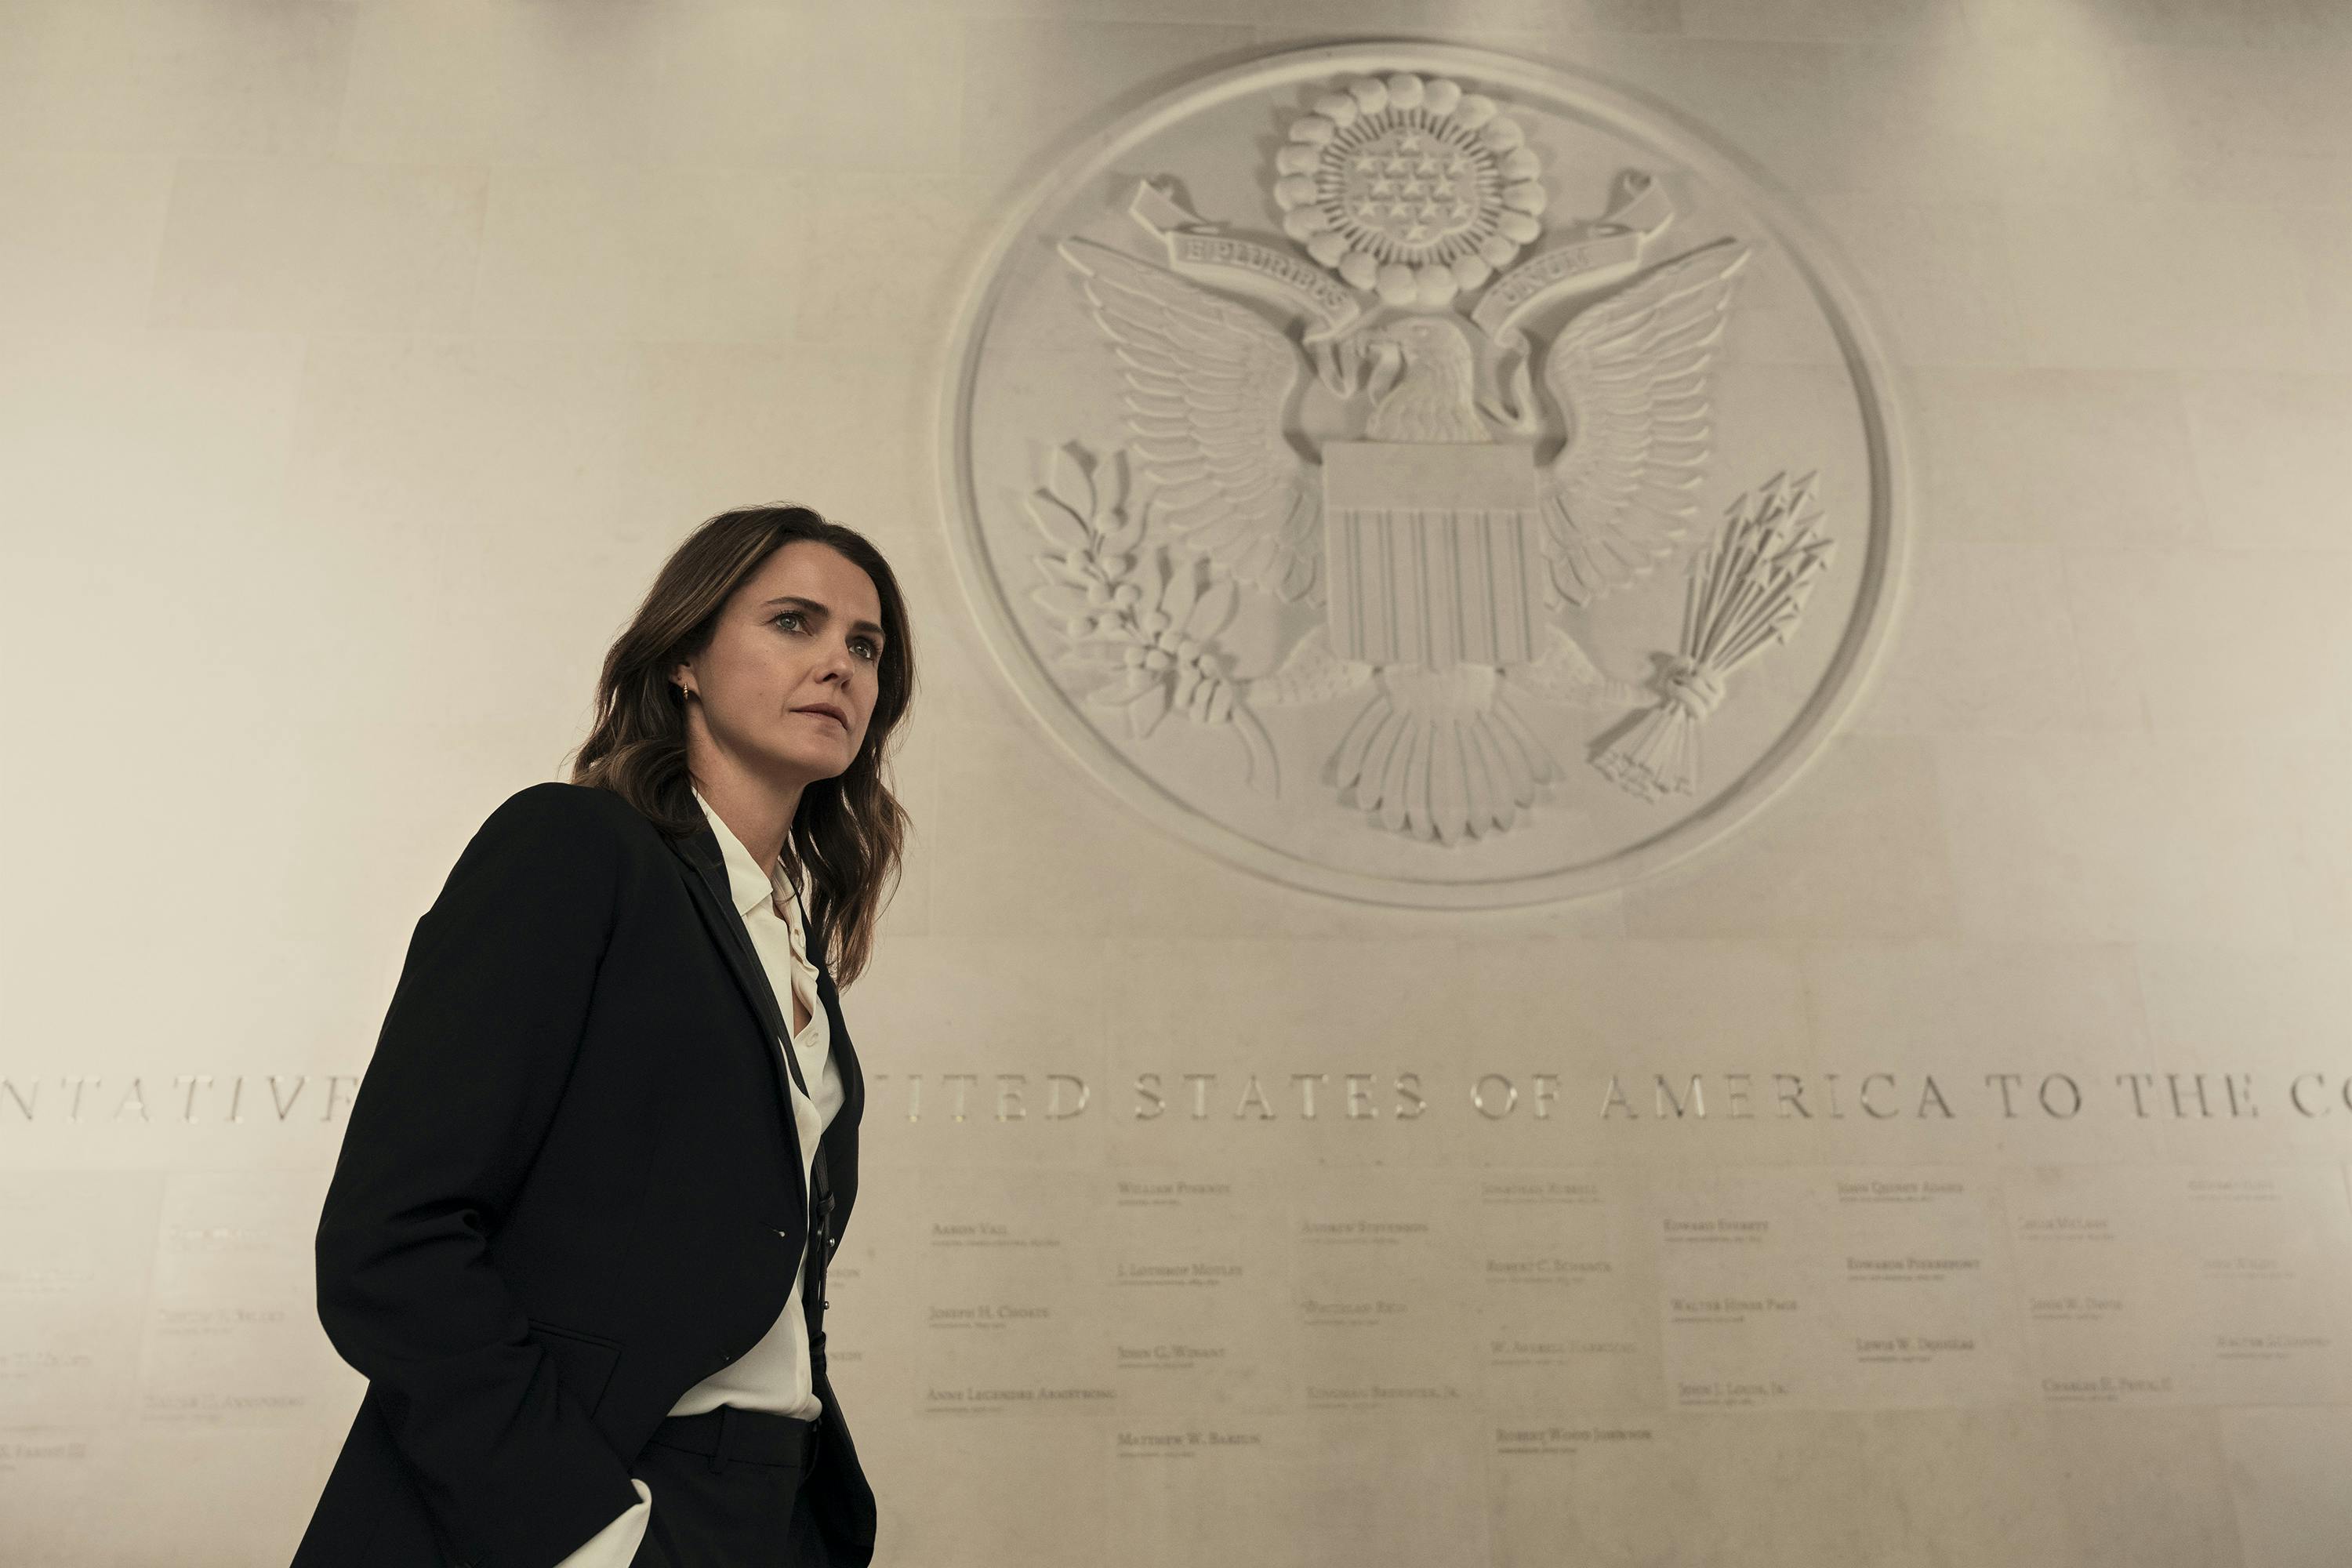 Kate Wyler (Keri Russell) walks past a U.S. seal. She wears a black suit and a white shirt and looks stressed. 